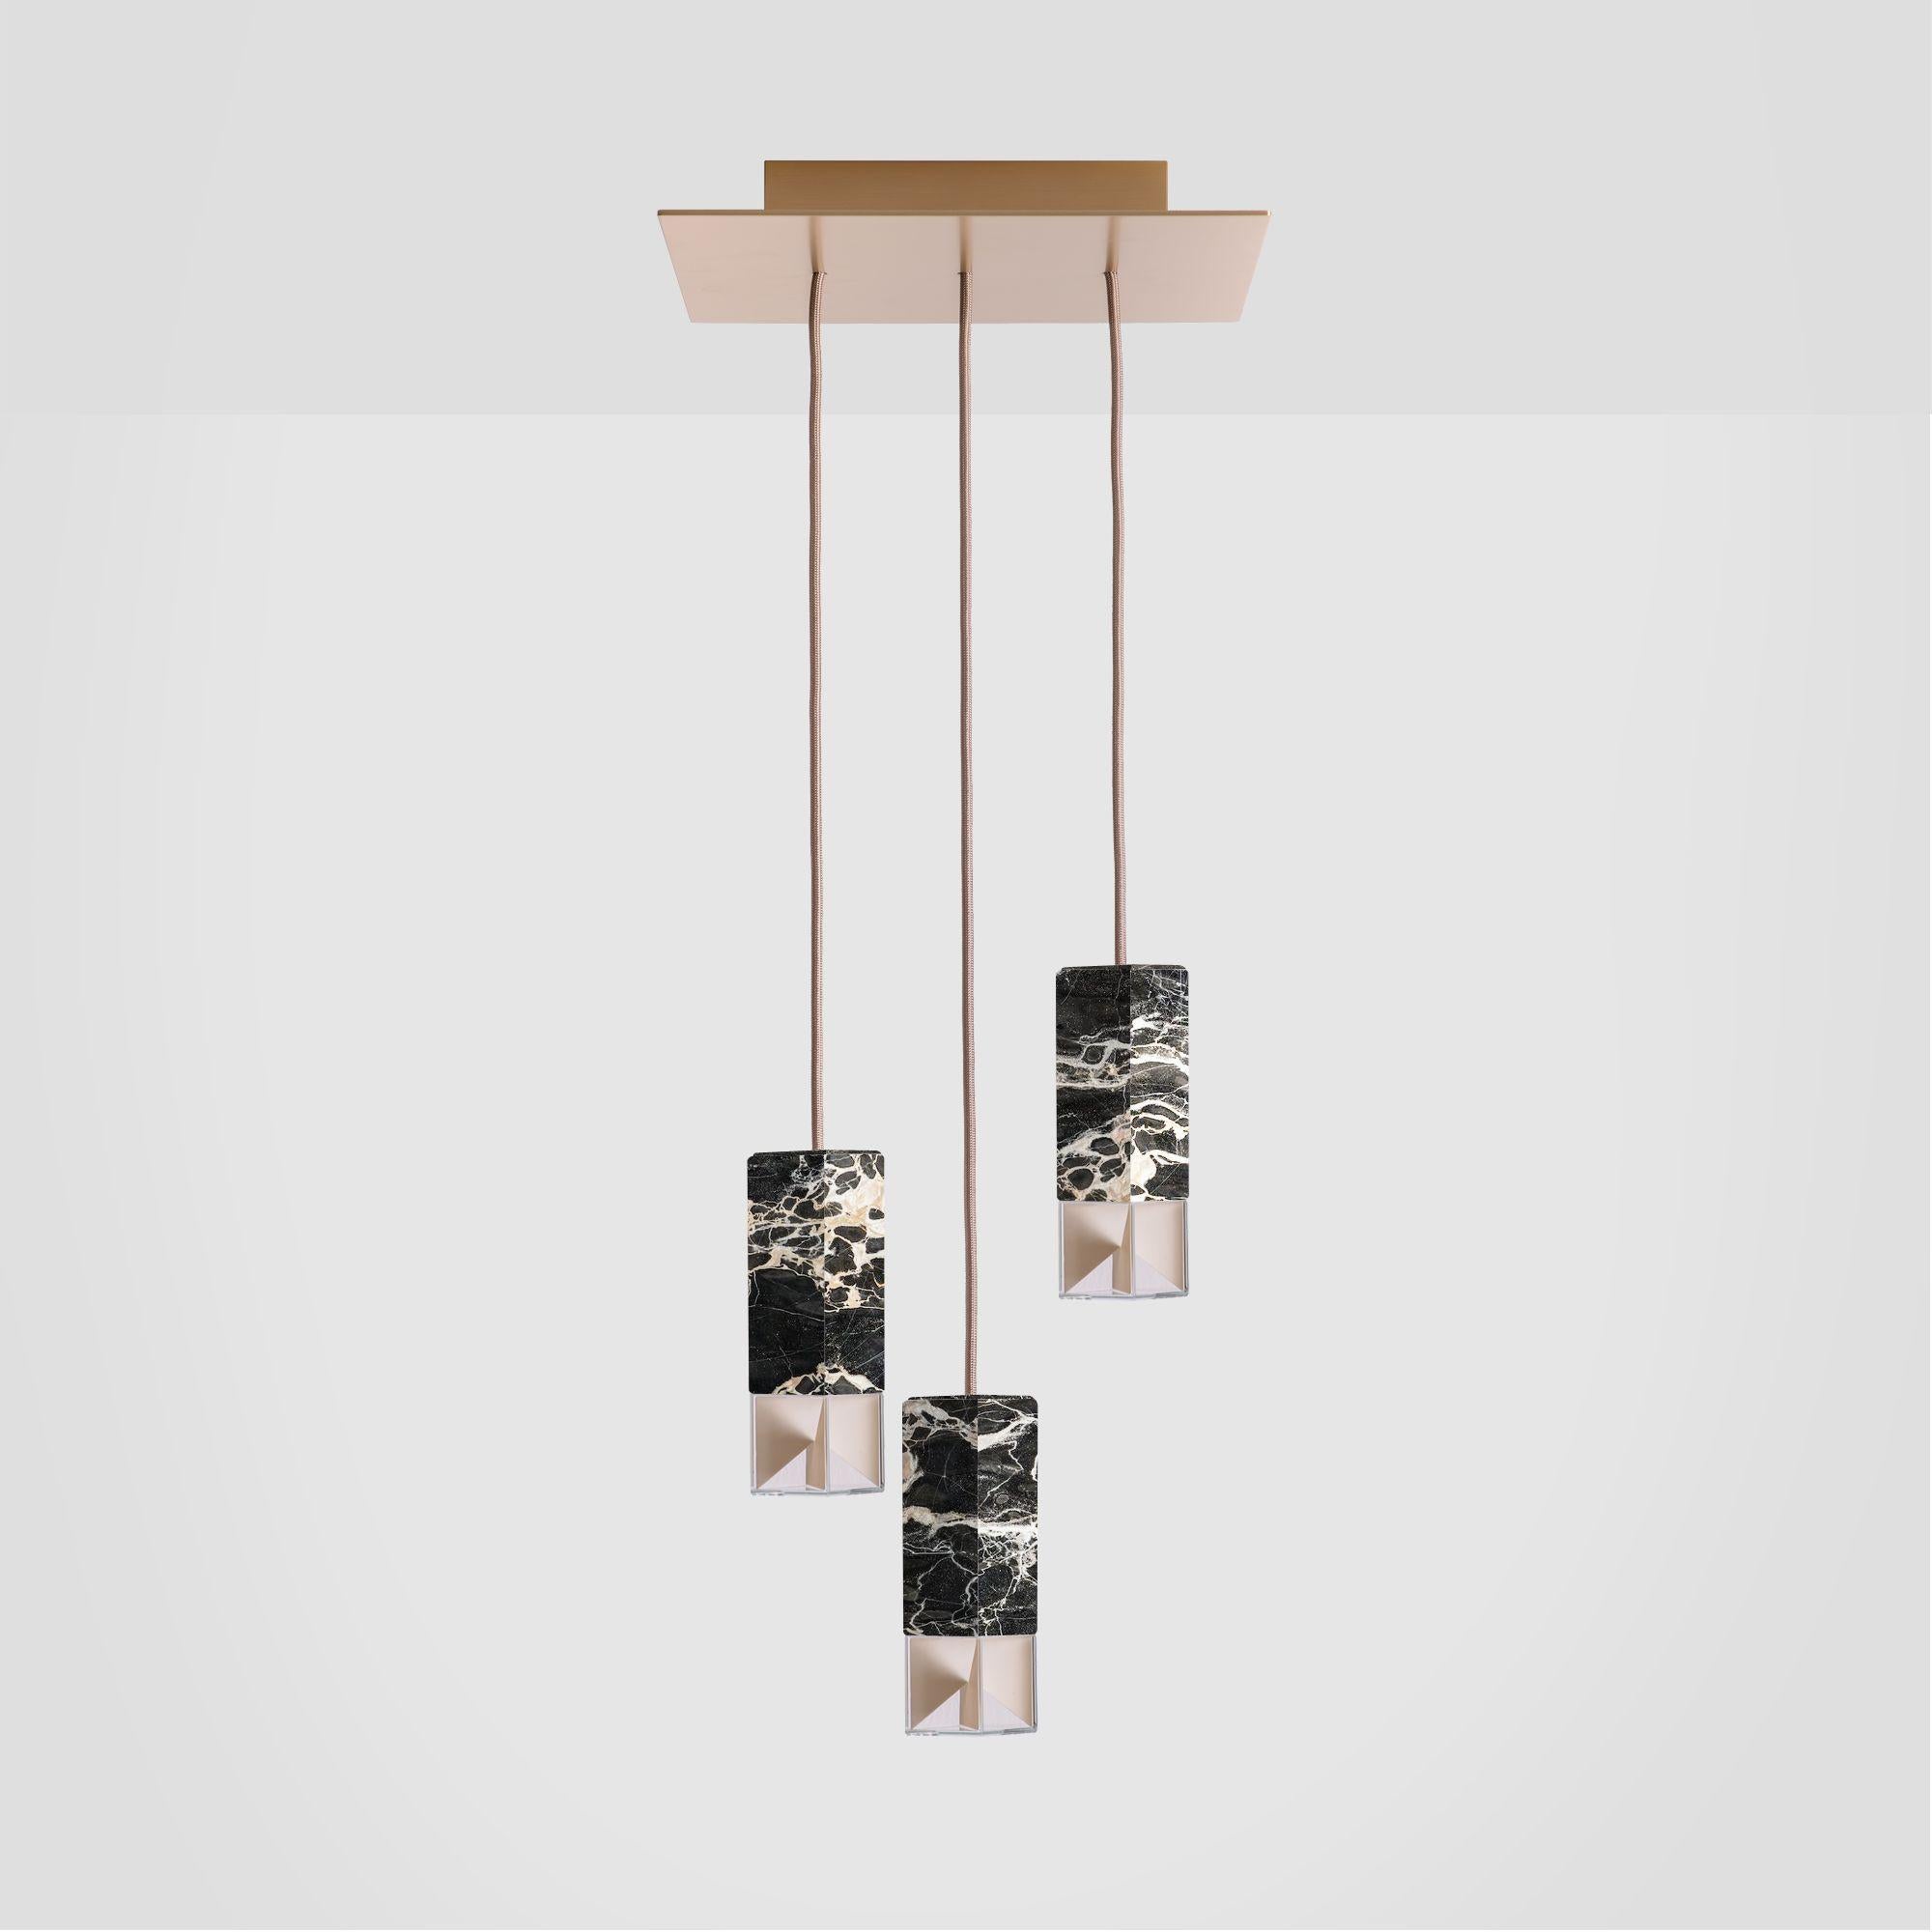 Lamp one trio chandelier black marble edition by Formaminima
Limited Edition
Dimensions: 30 x 30 x H 68 cm
Materials: Red Collemandina, Green Alpes, Royal pink yellow
 Satin solid brass, crystal glass diffuser
 Limoges biscuit-finish porcelain